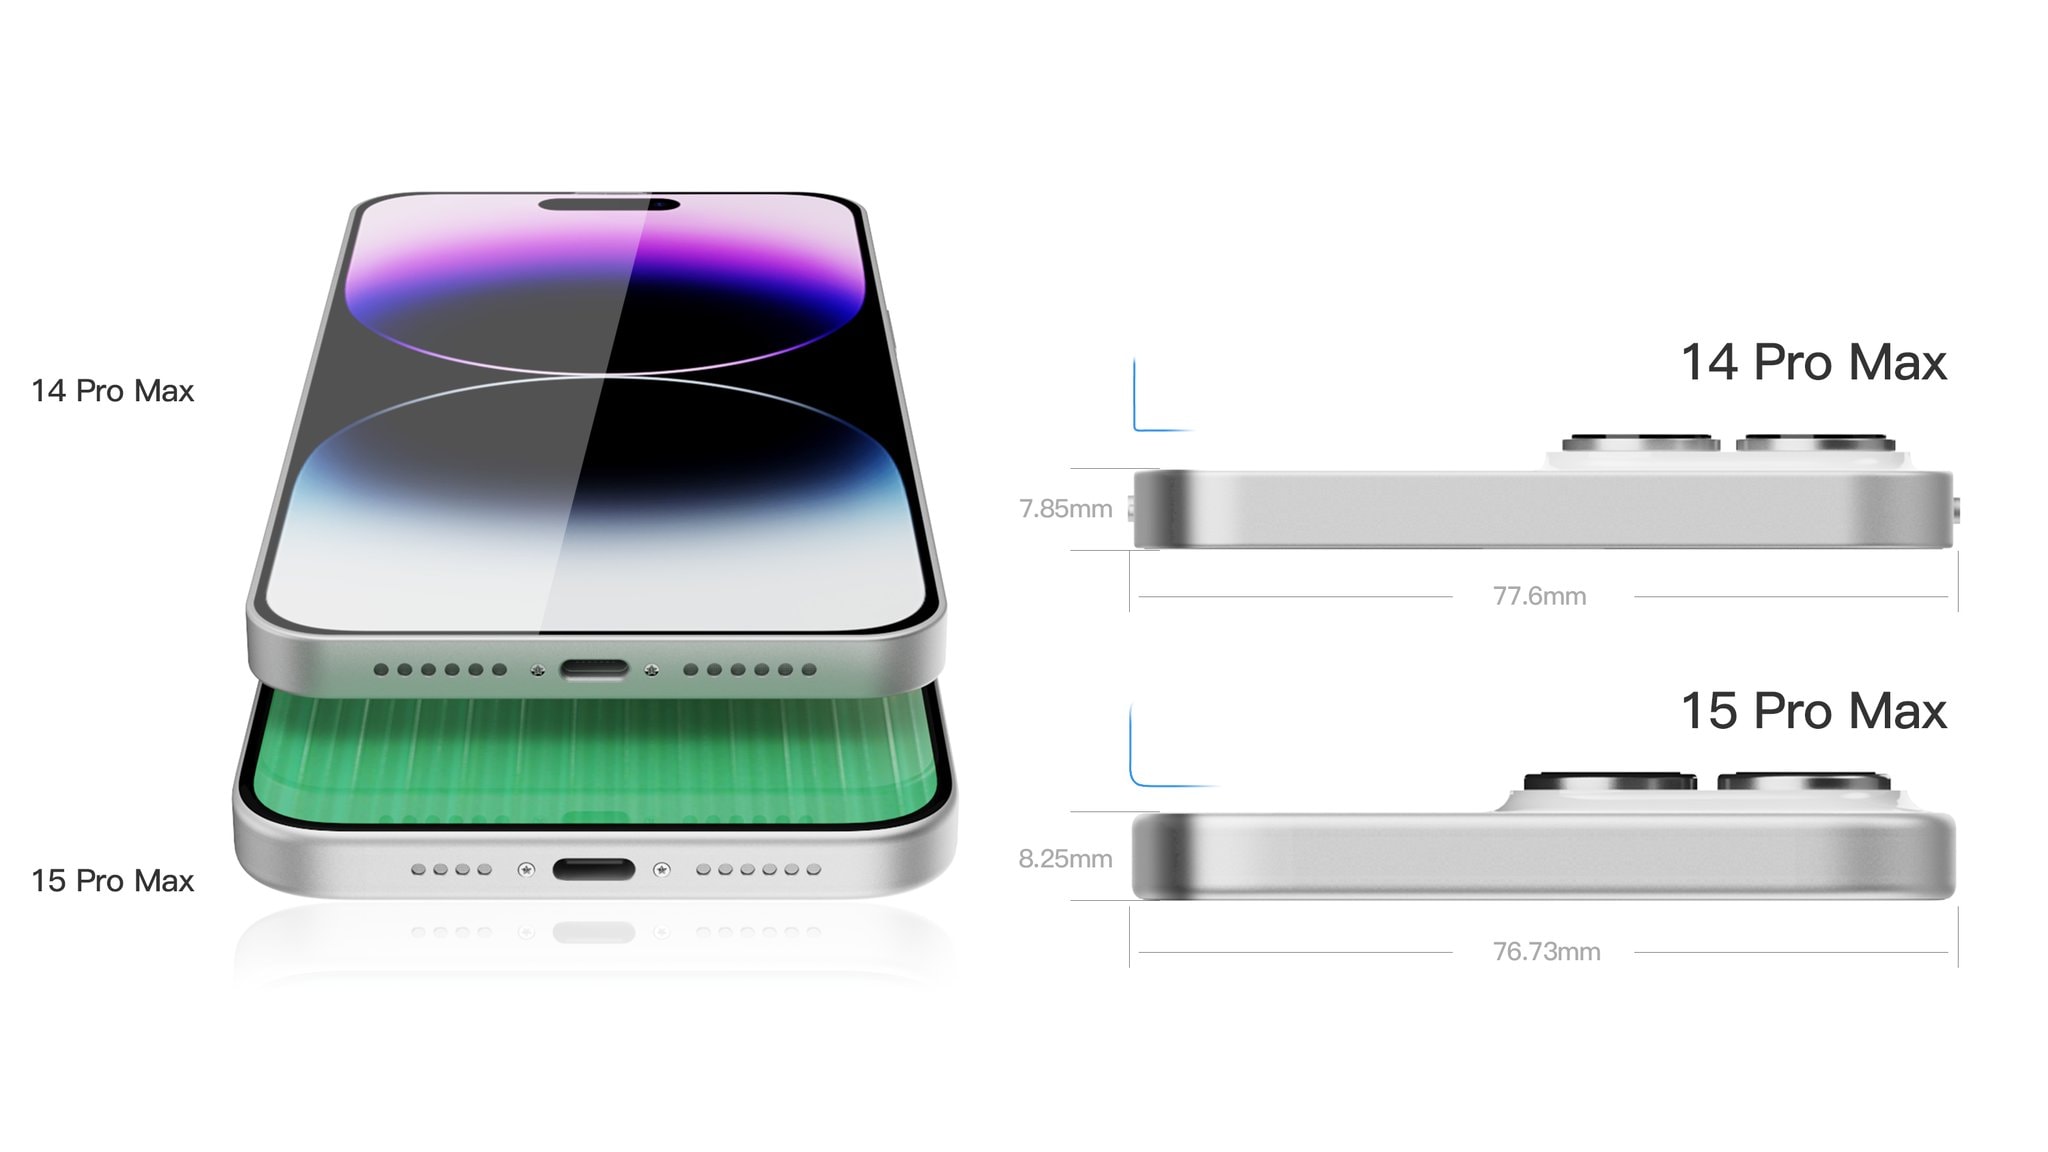 iPhone 14 Pro Max vs. iPhone 15 Pro Max thickness comparison renders